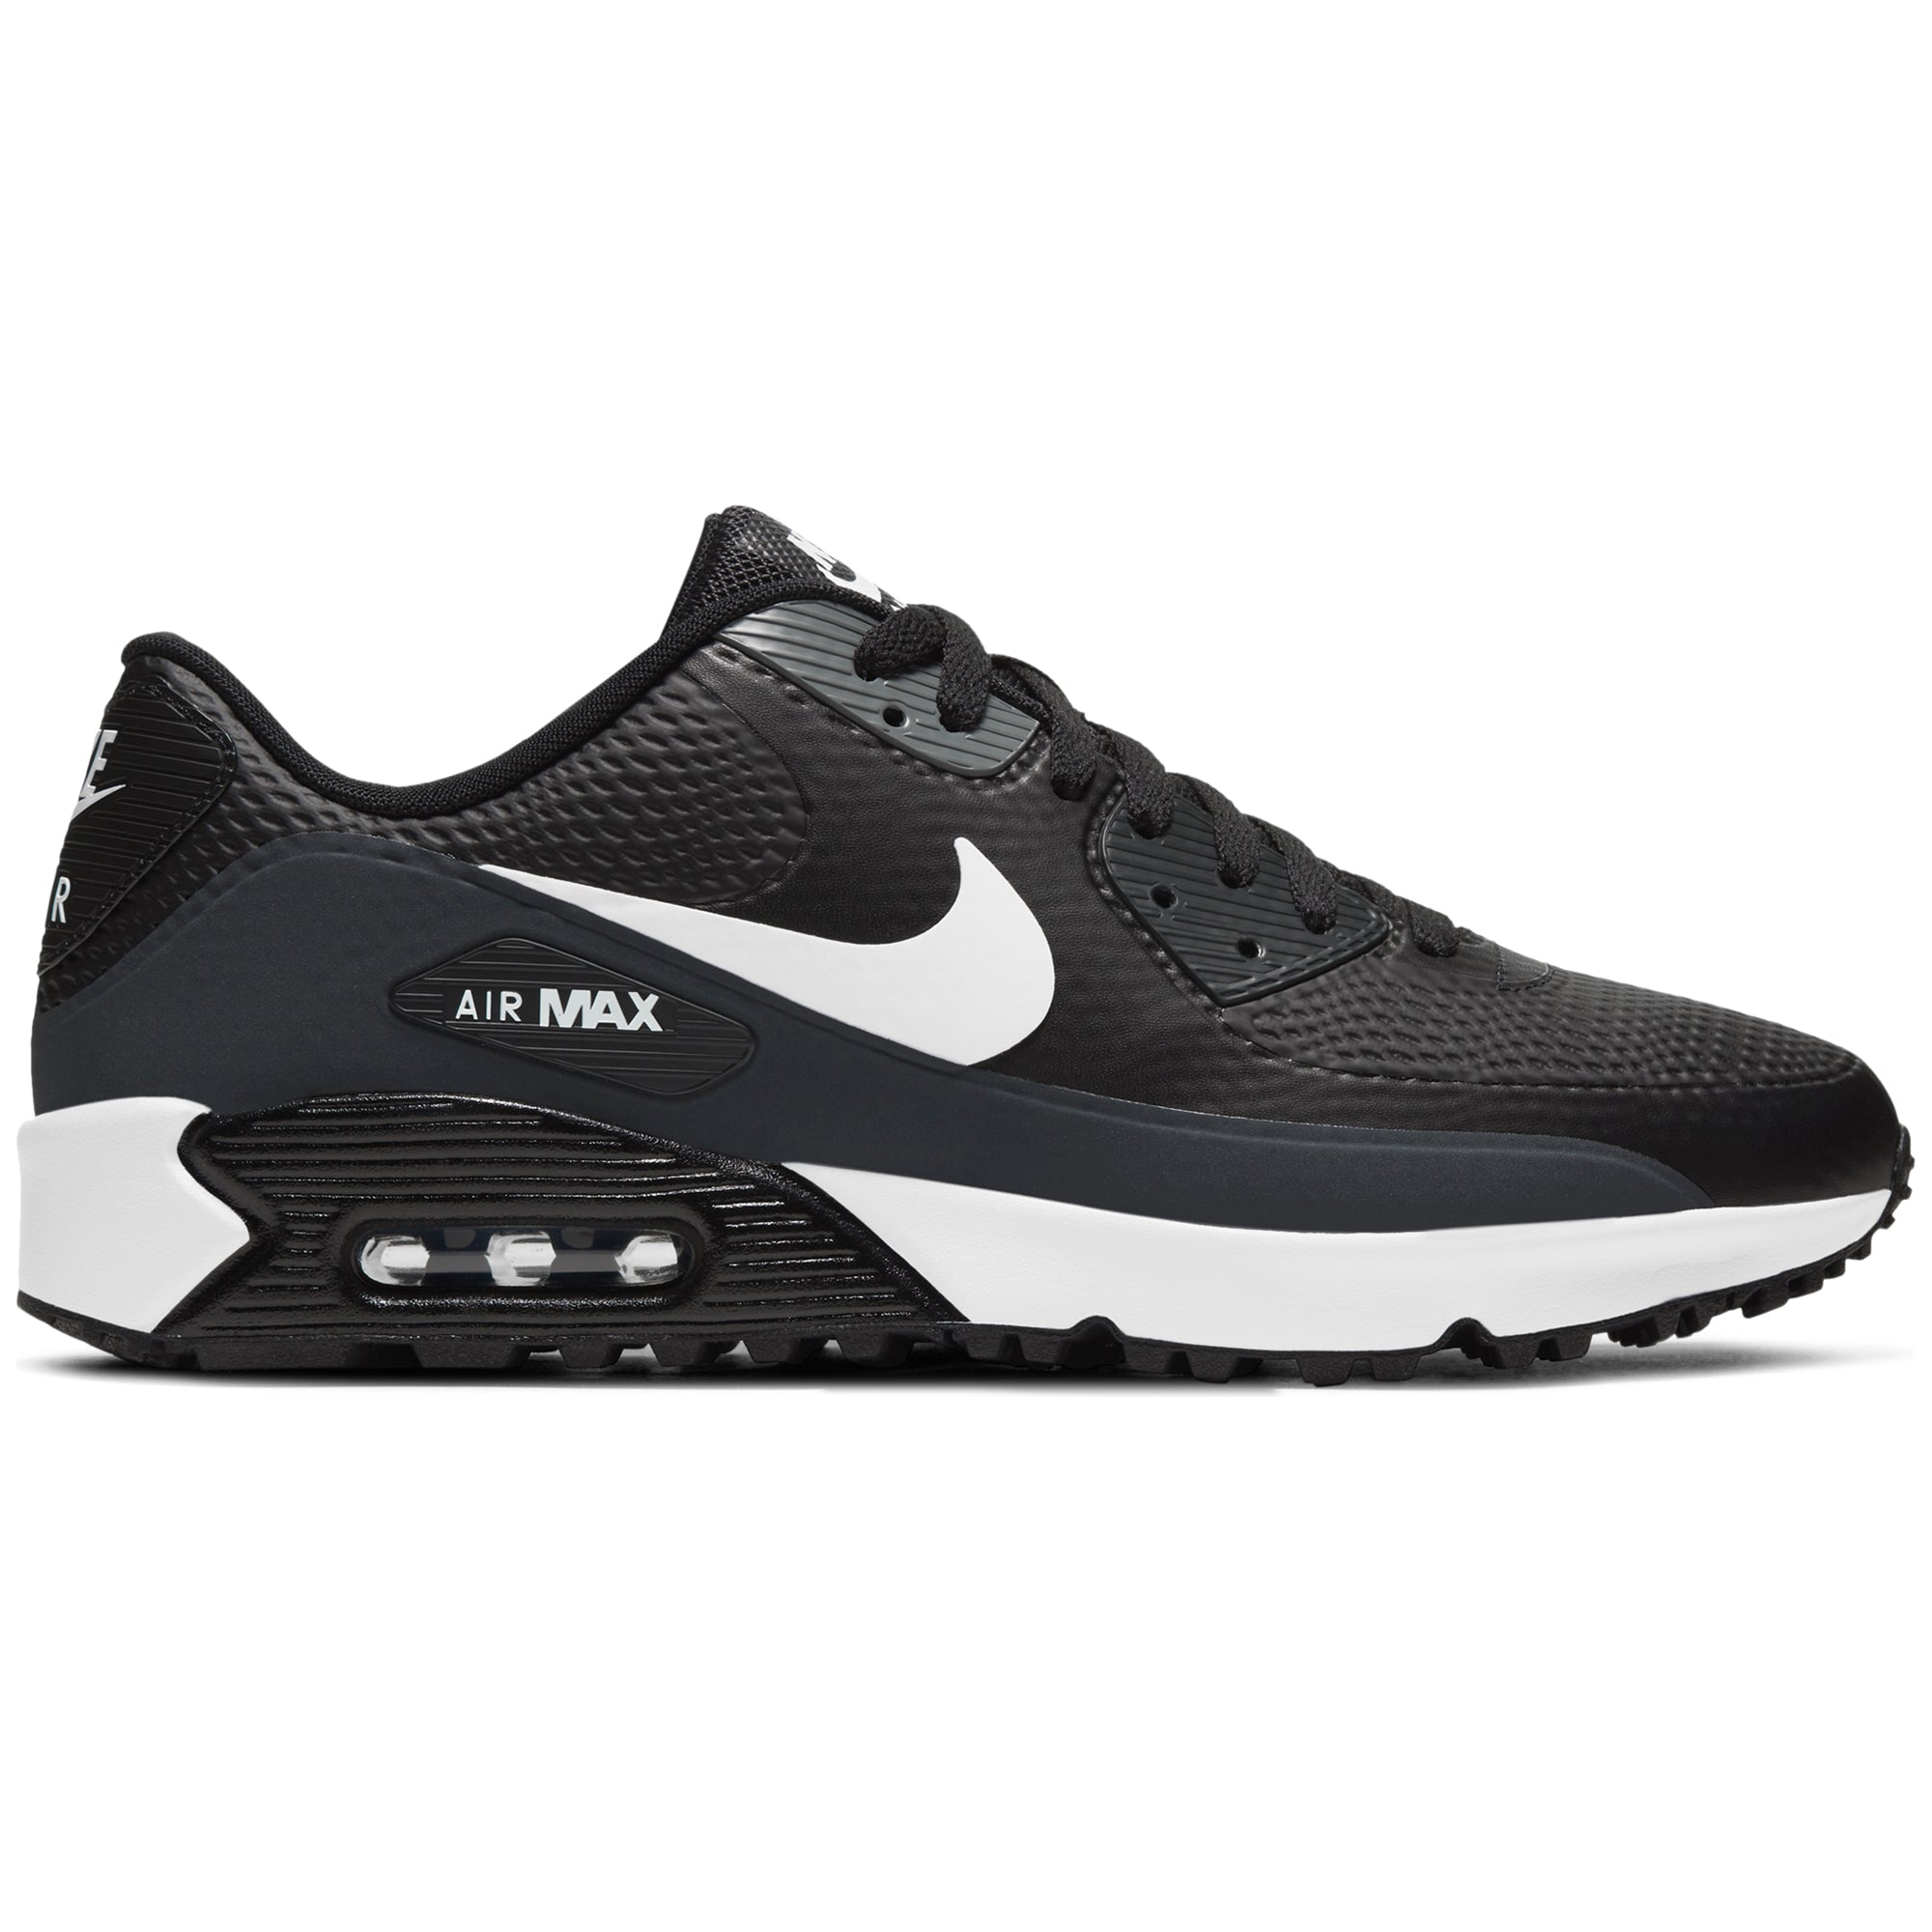 Nike Golf Air Max 90 G Shoes Black White 002 | Function18 | Restrictedgs